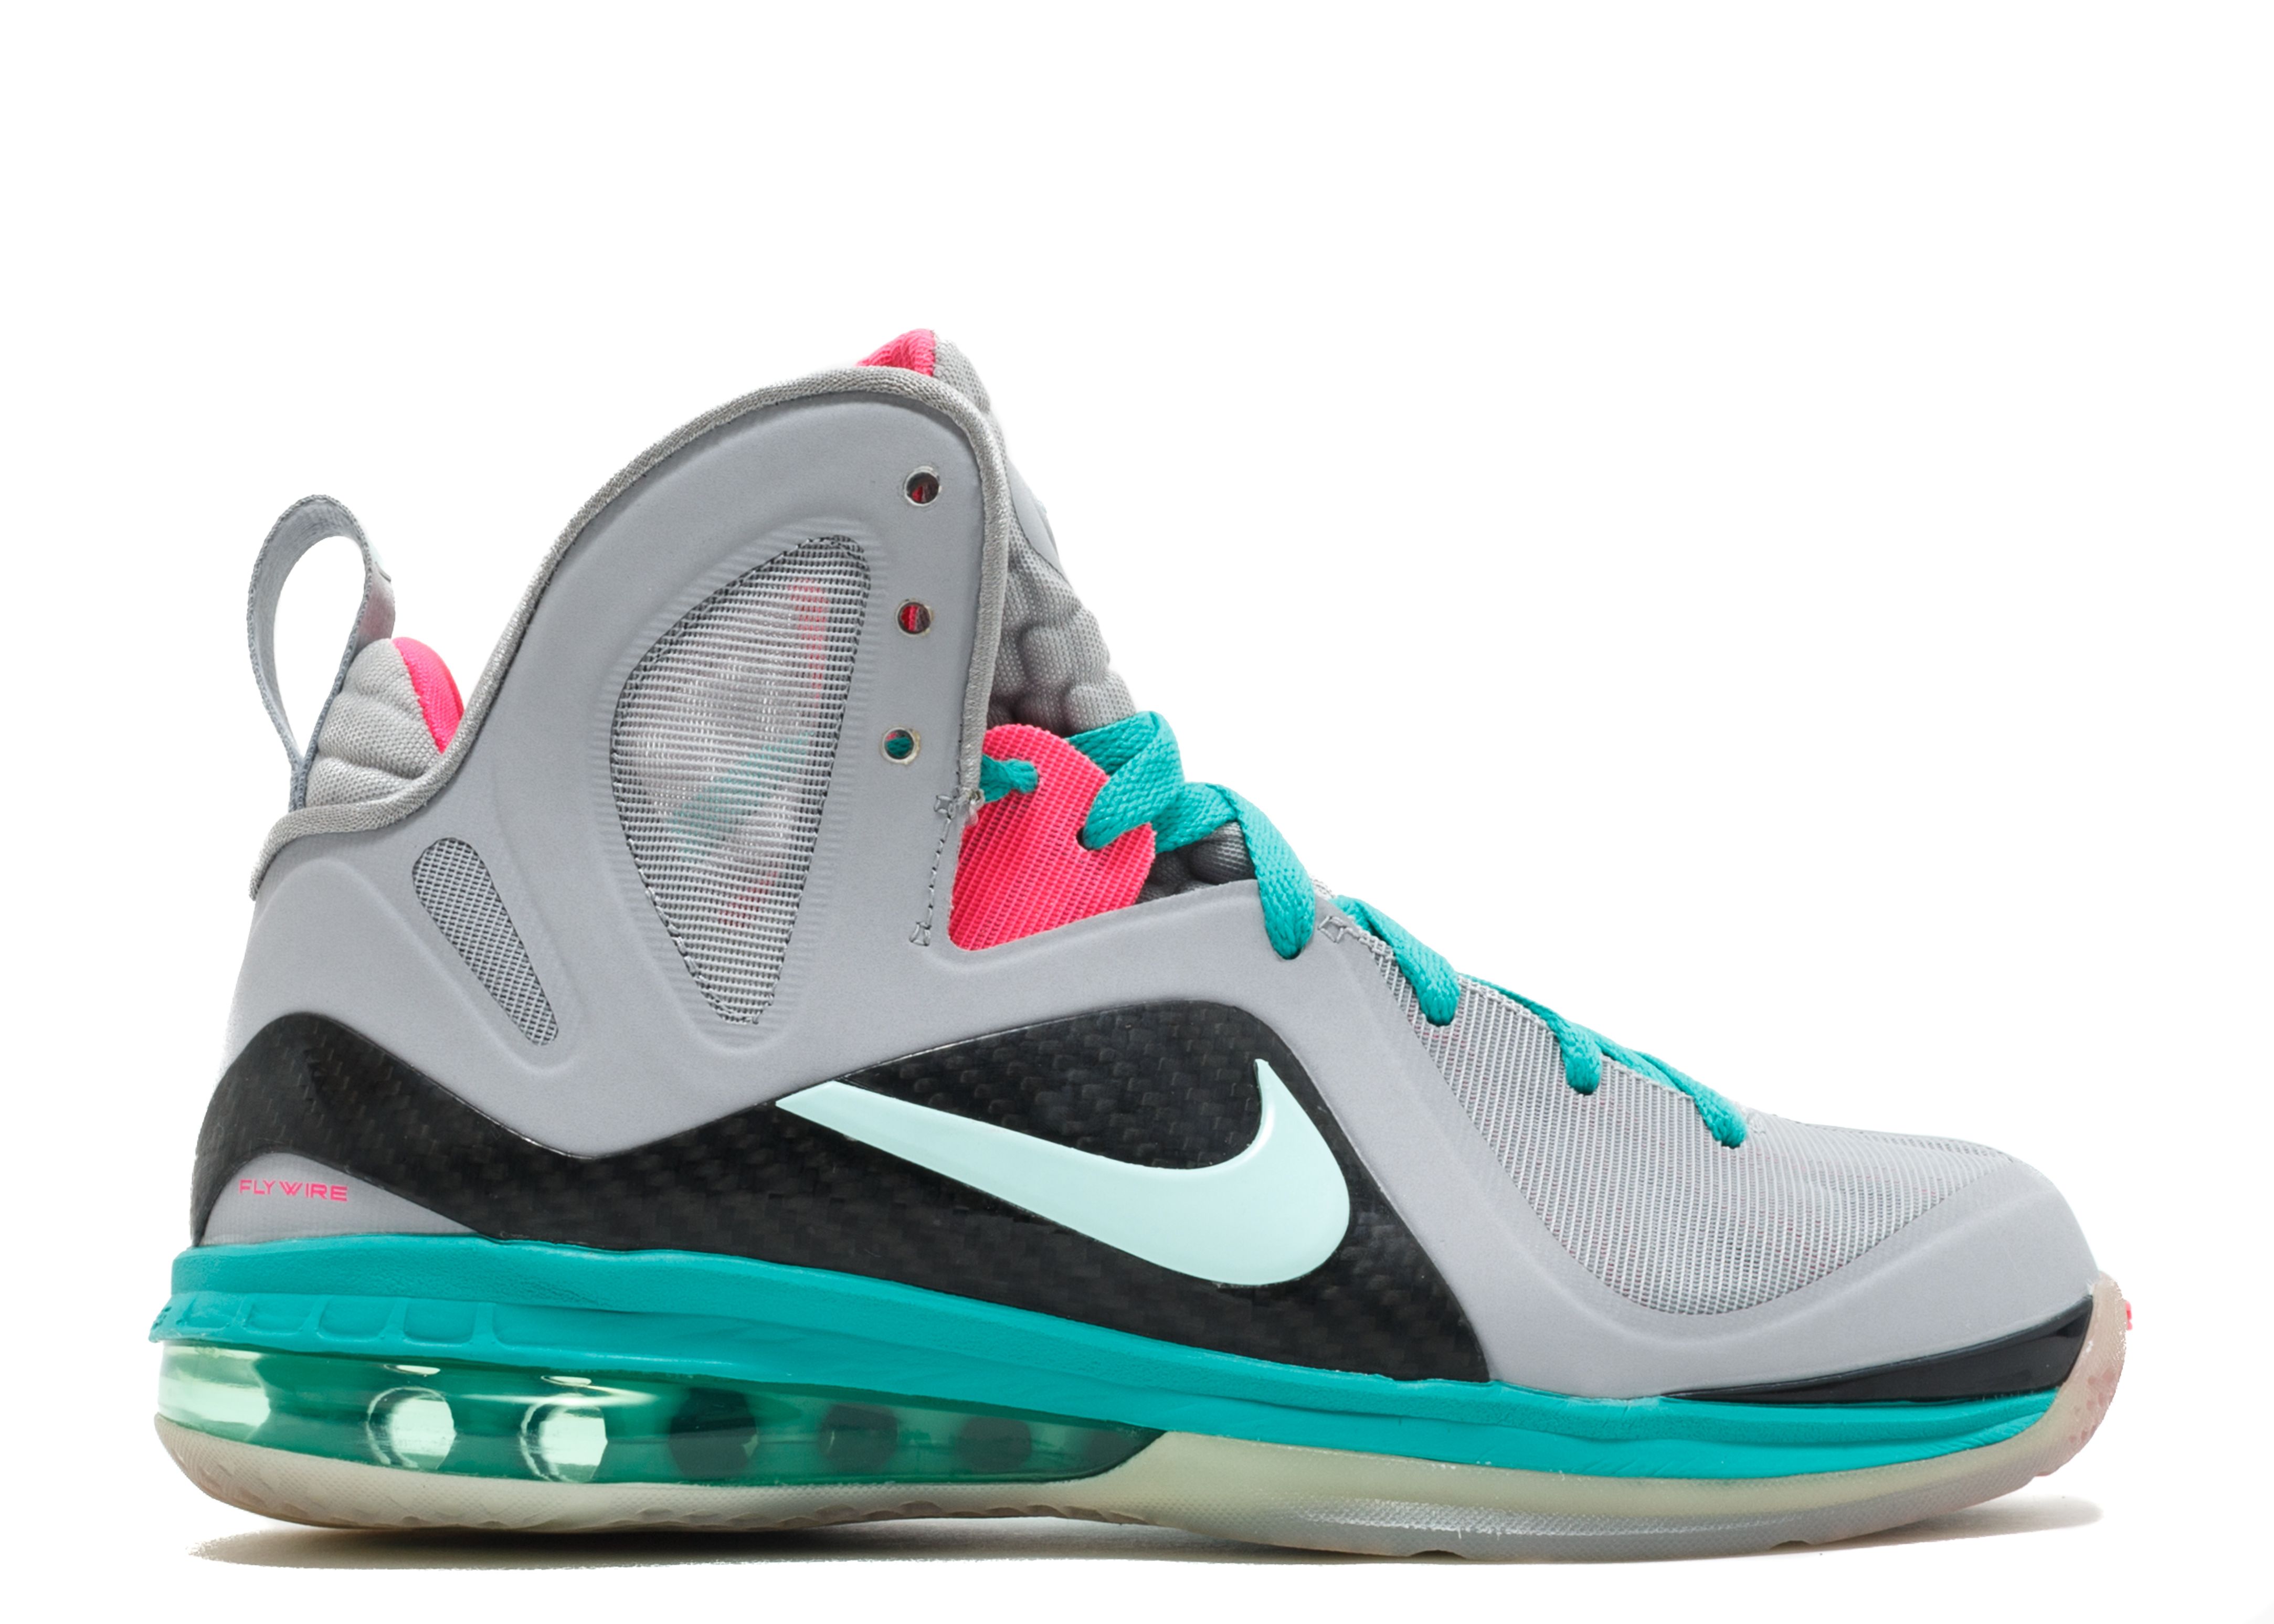 lebron 9 for sale cheap nike shoes online